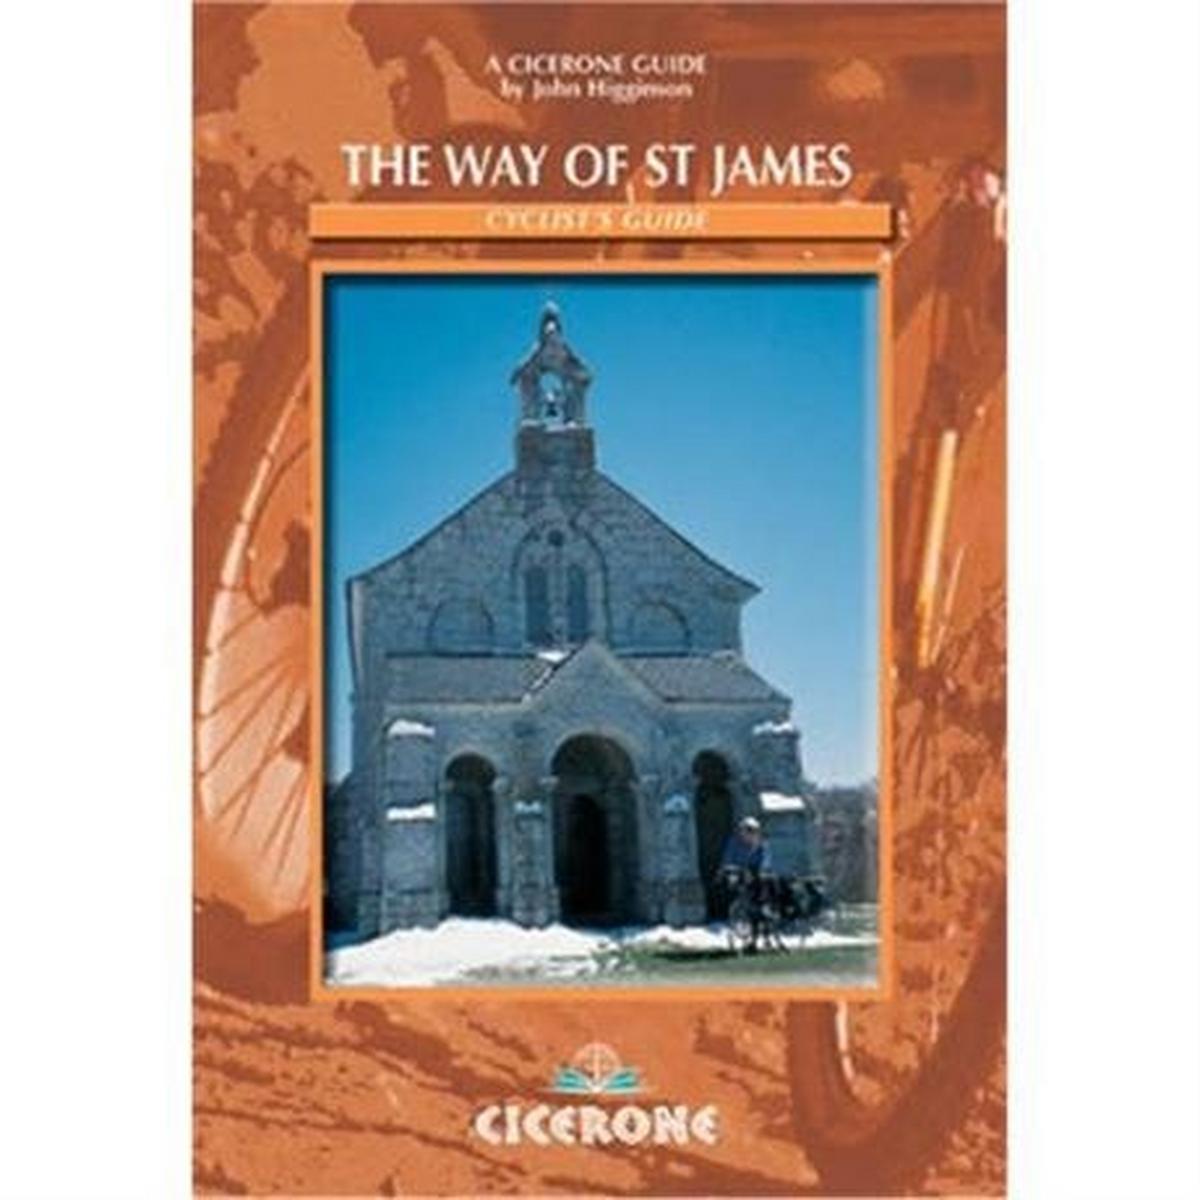 Cicerone Guide Book: The Way of St James - Cyclist's Guide